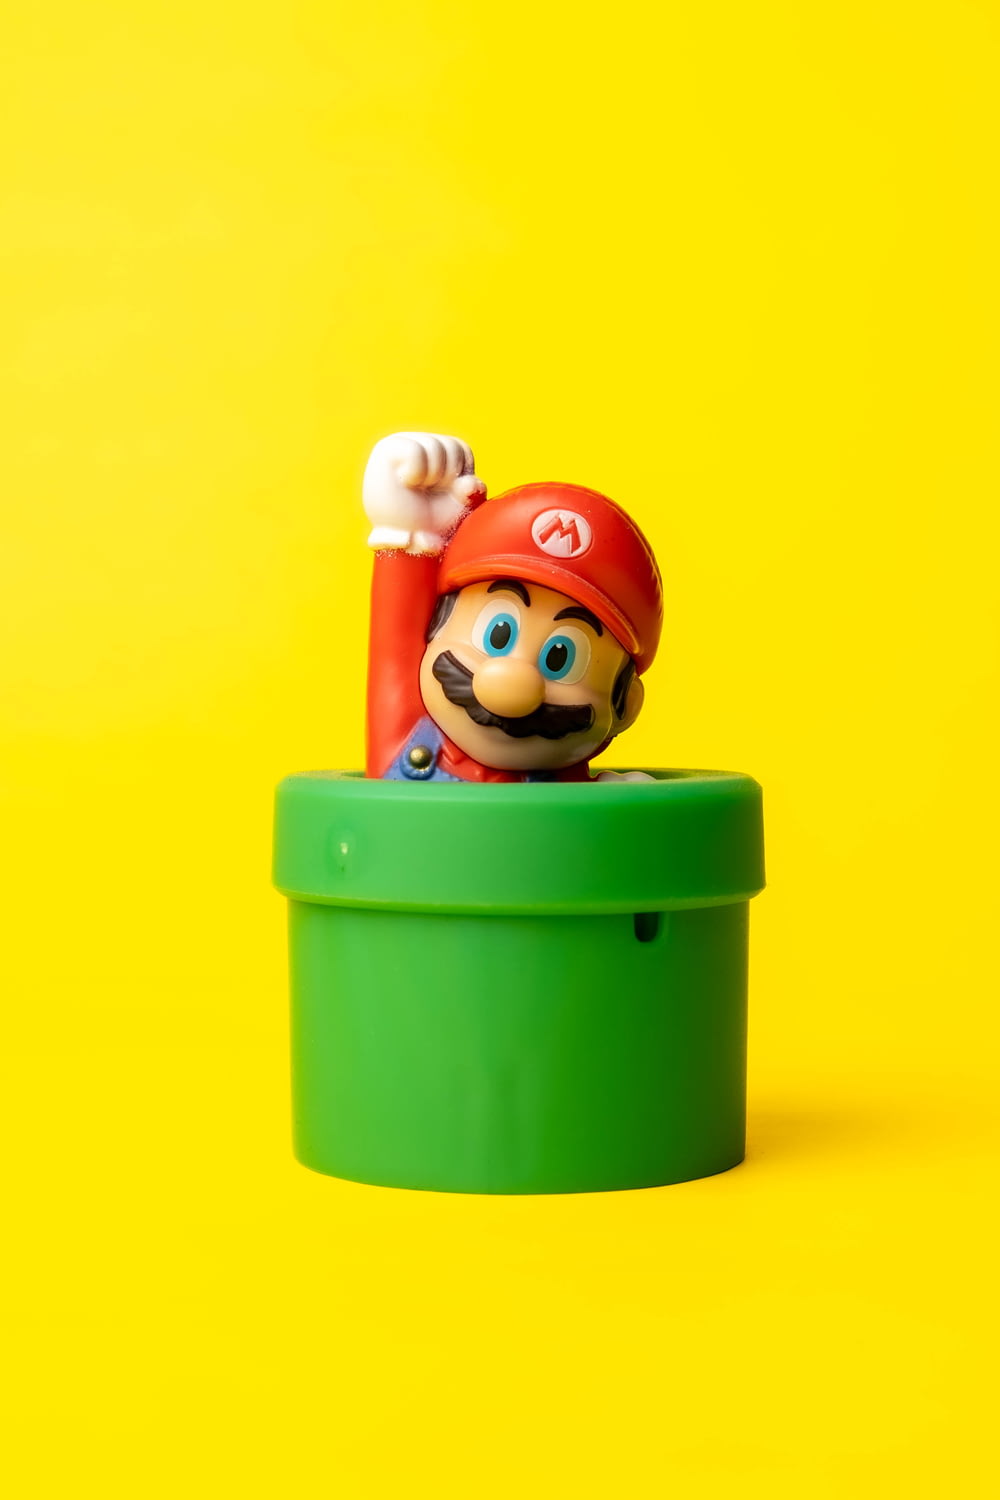 a toy mario in a green container on a yellow background